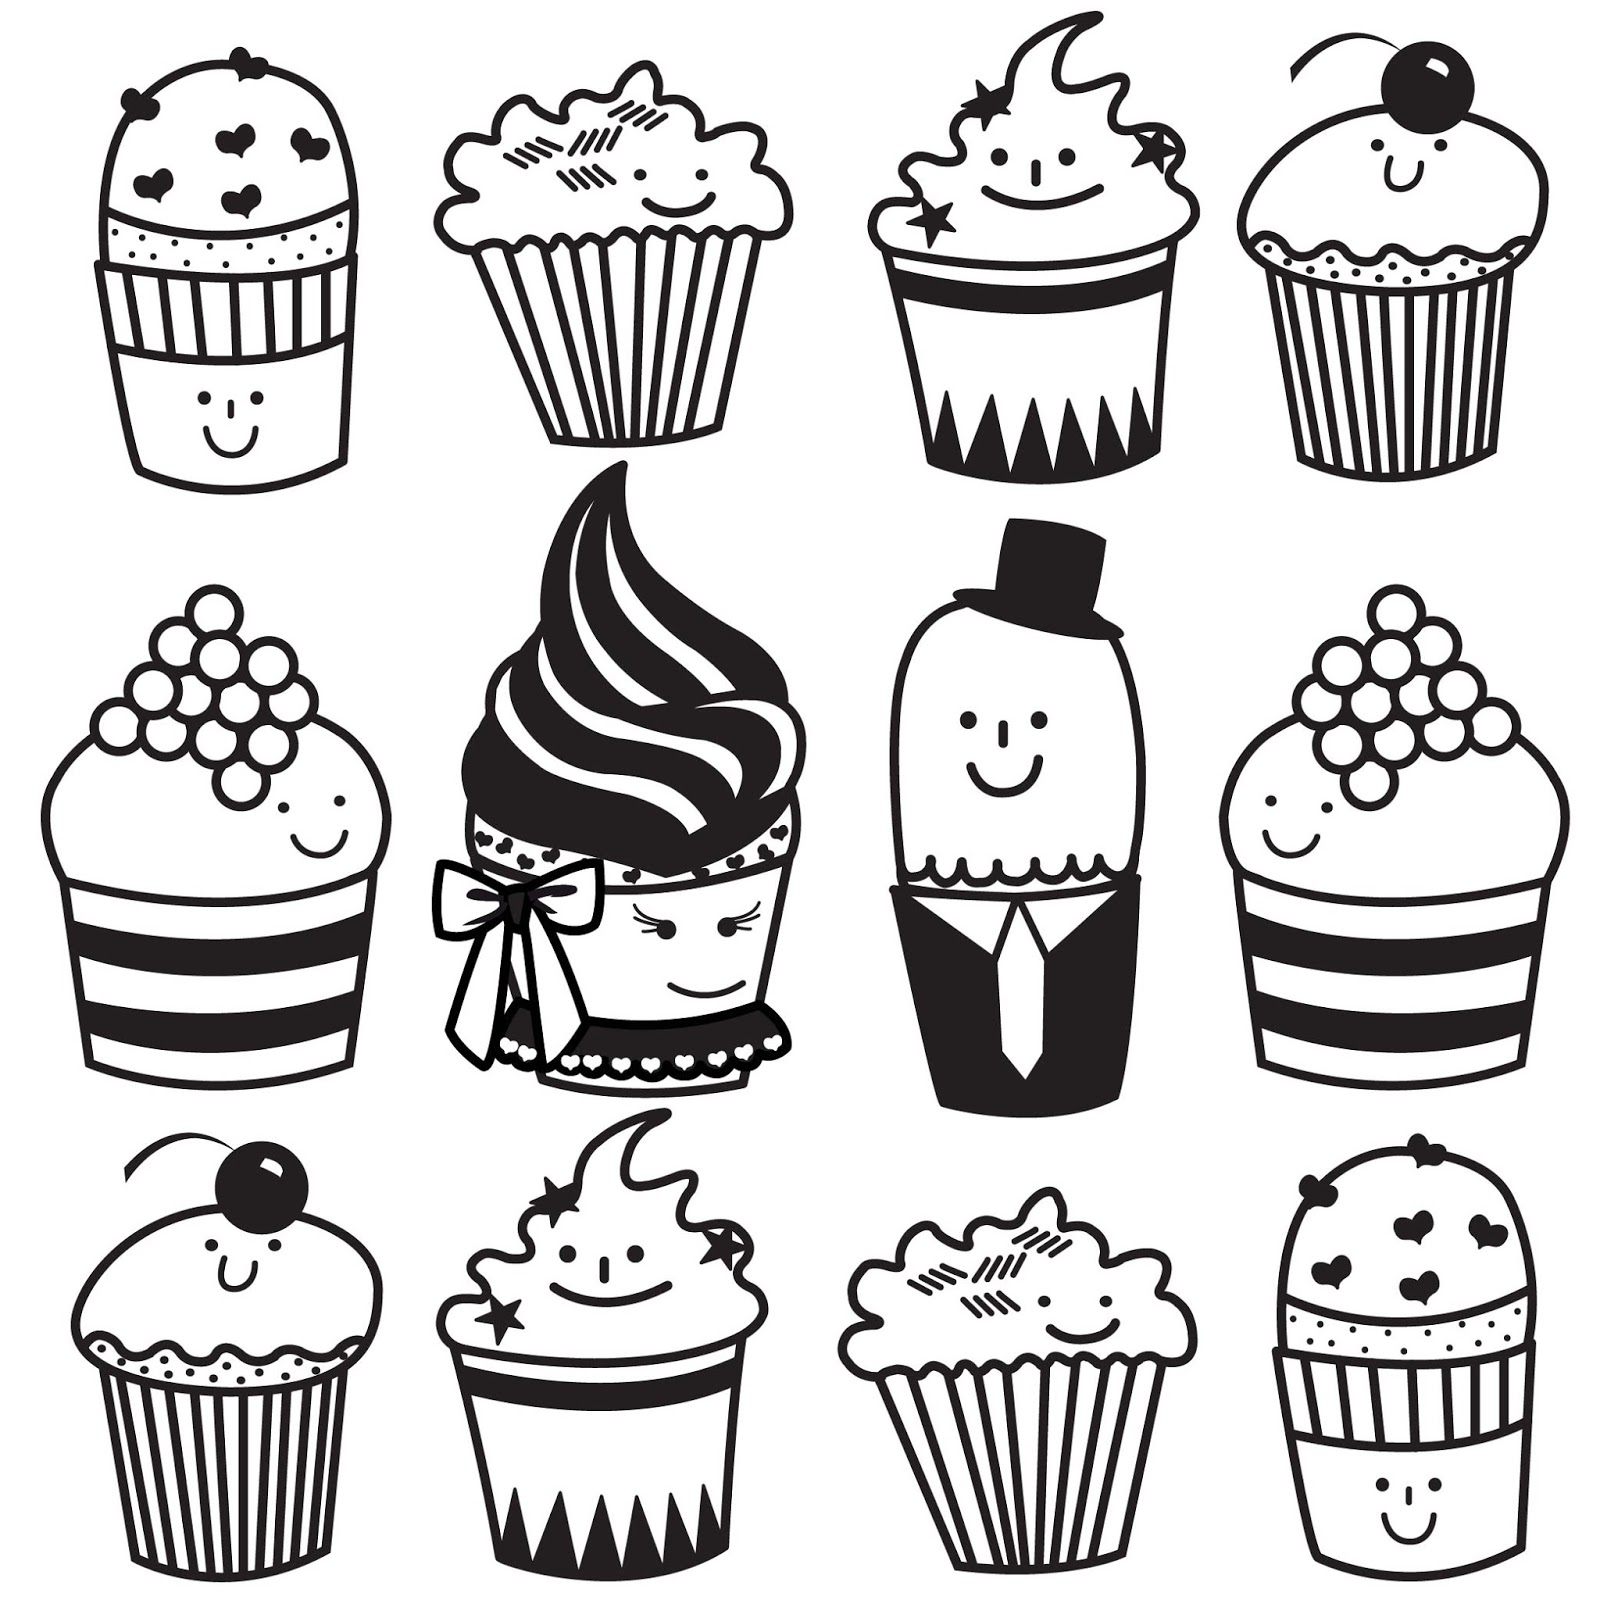 Cute Cupcake Line Drawing Images  Pictures - Becuo